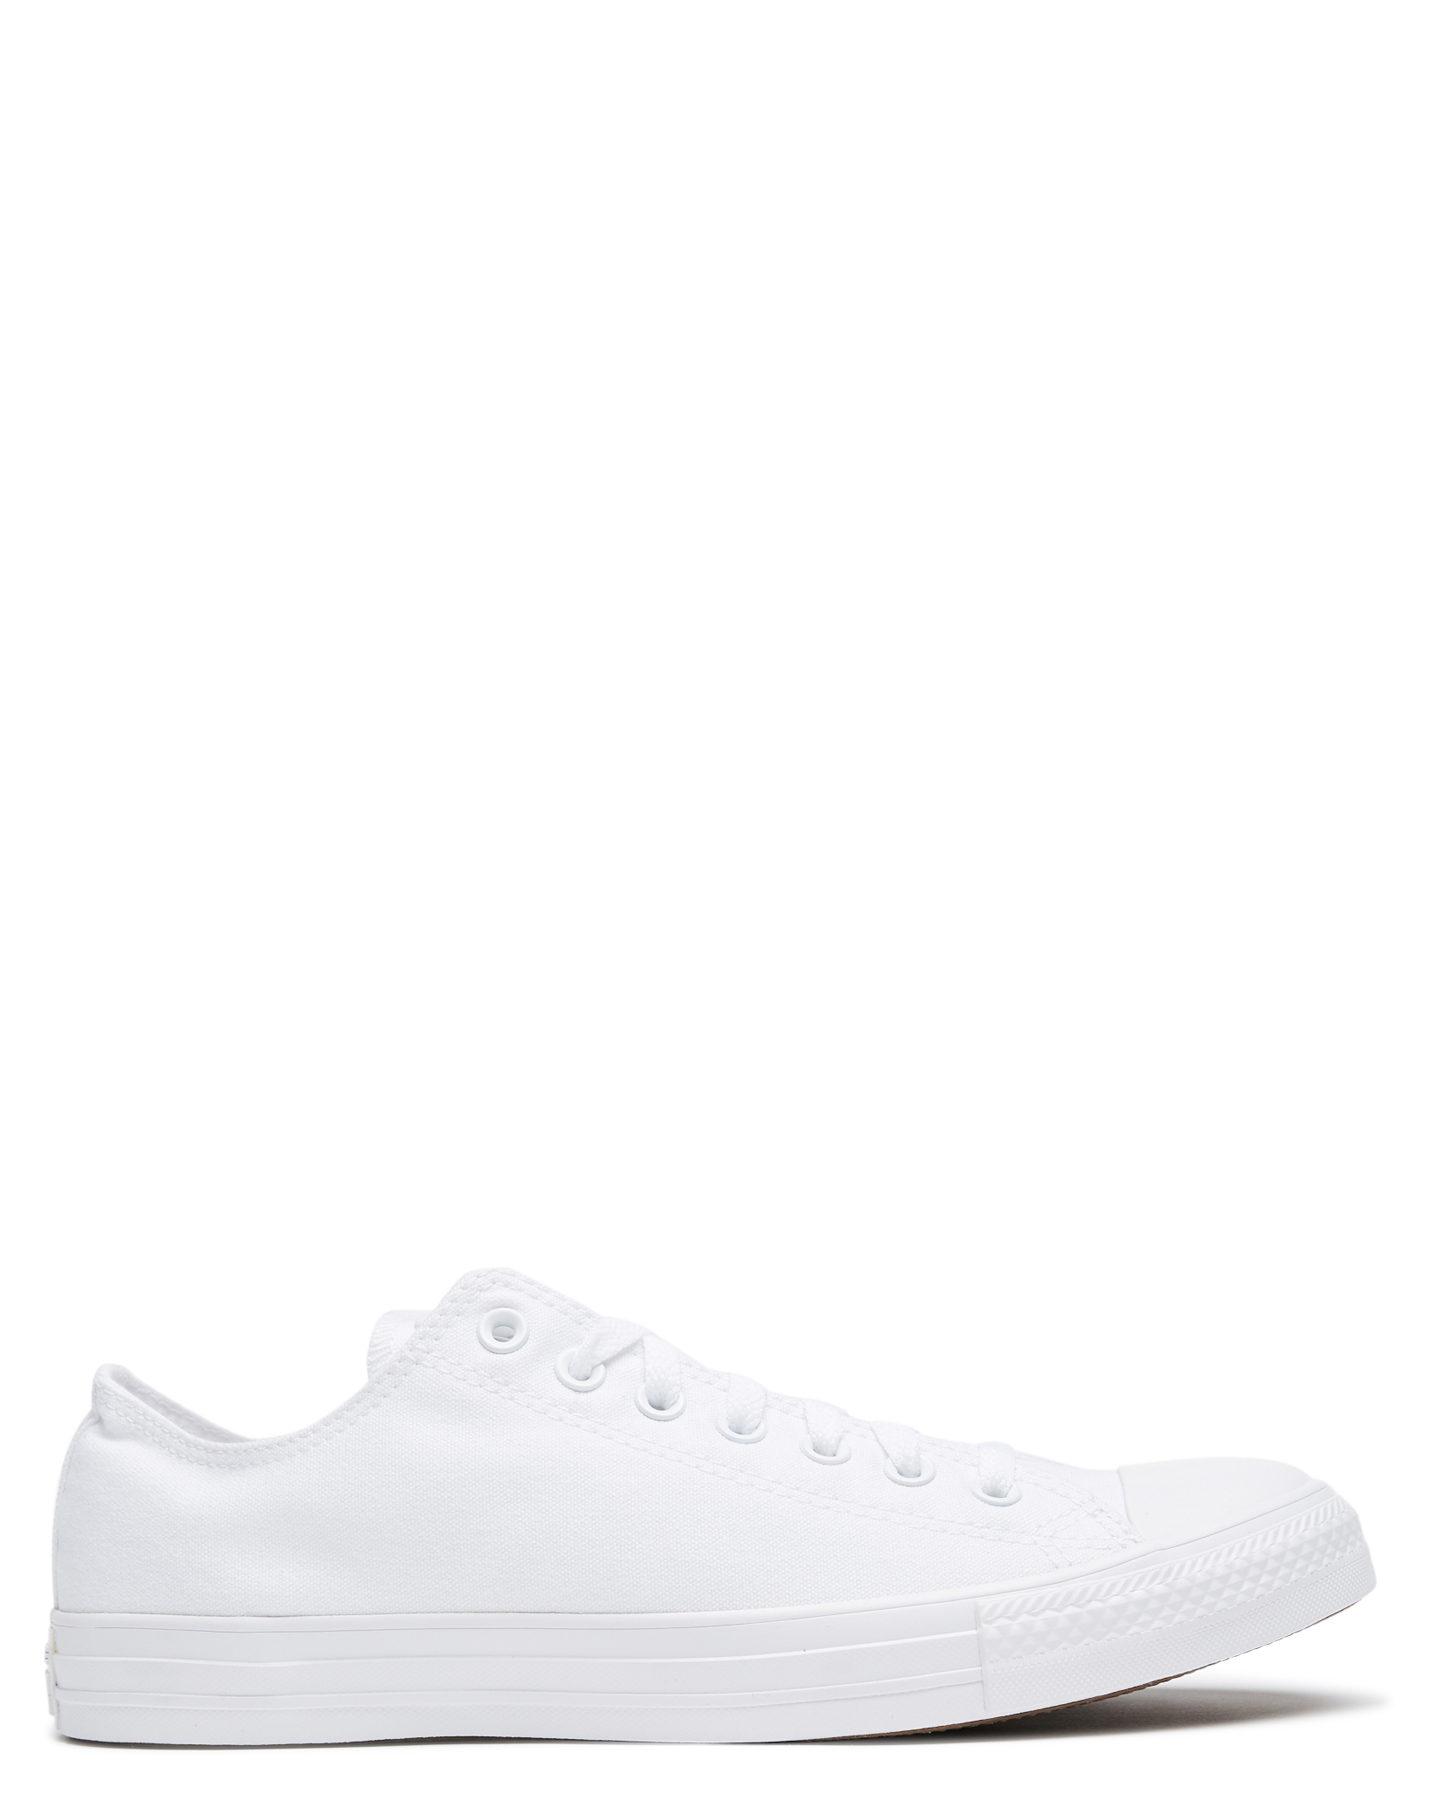 converse all star womens sneakers